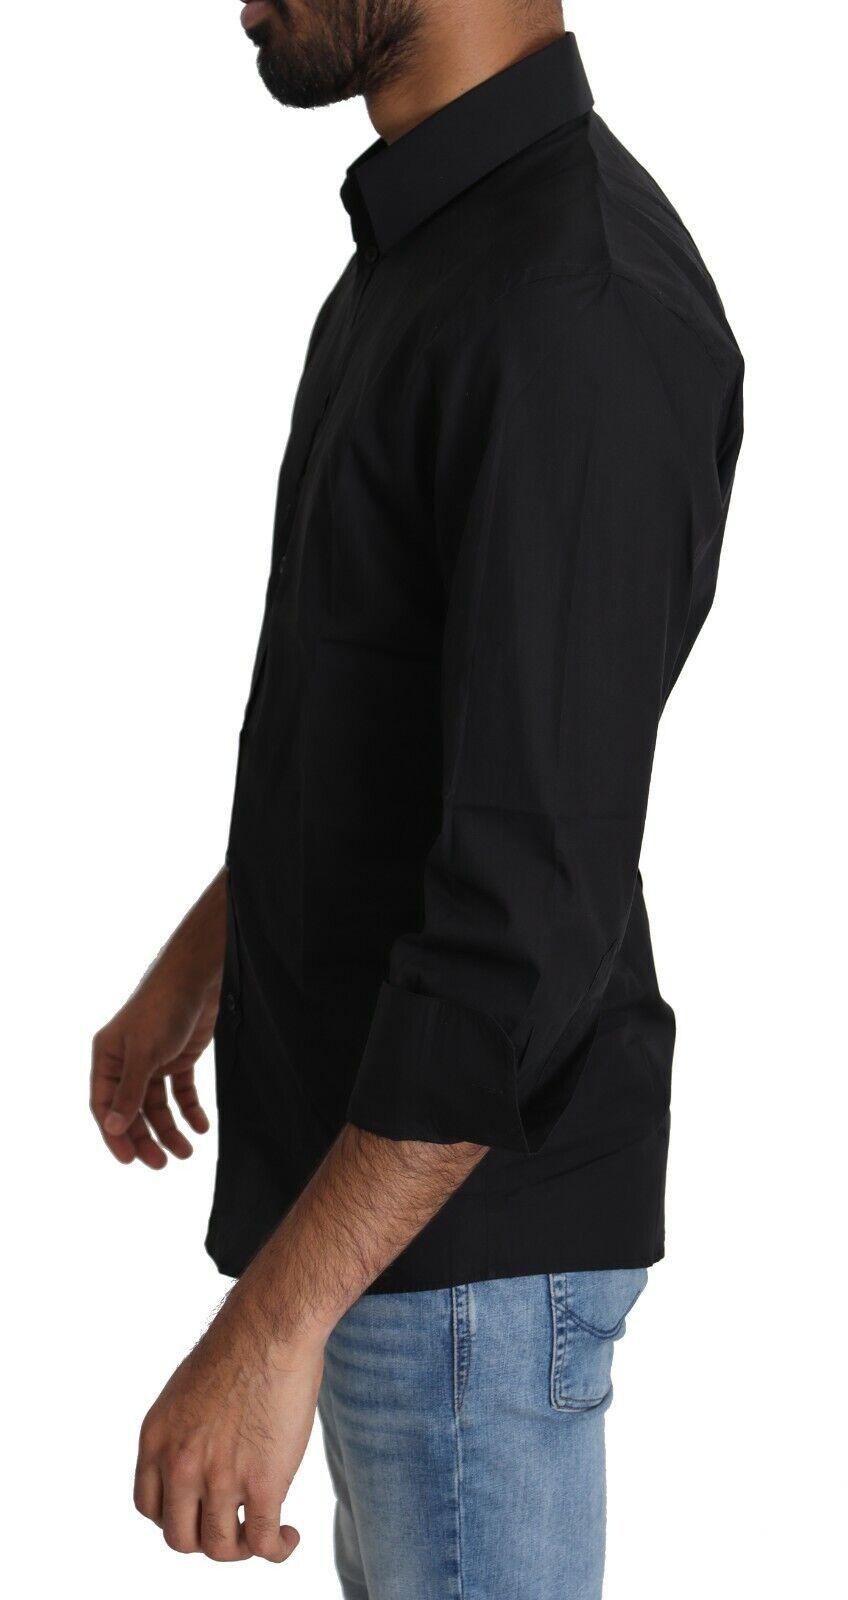 Black Cotton Formal Dress Men Top Shirt - Designed by Dolce & Gabbana Available to Buy at a Discounted Price on Moon Behind The Hill Online Designer Discount Store